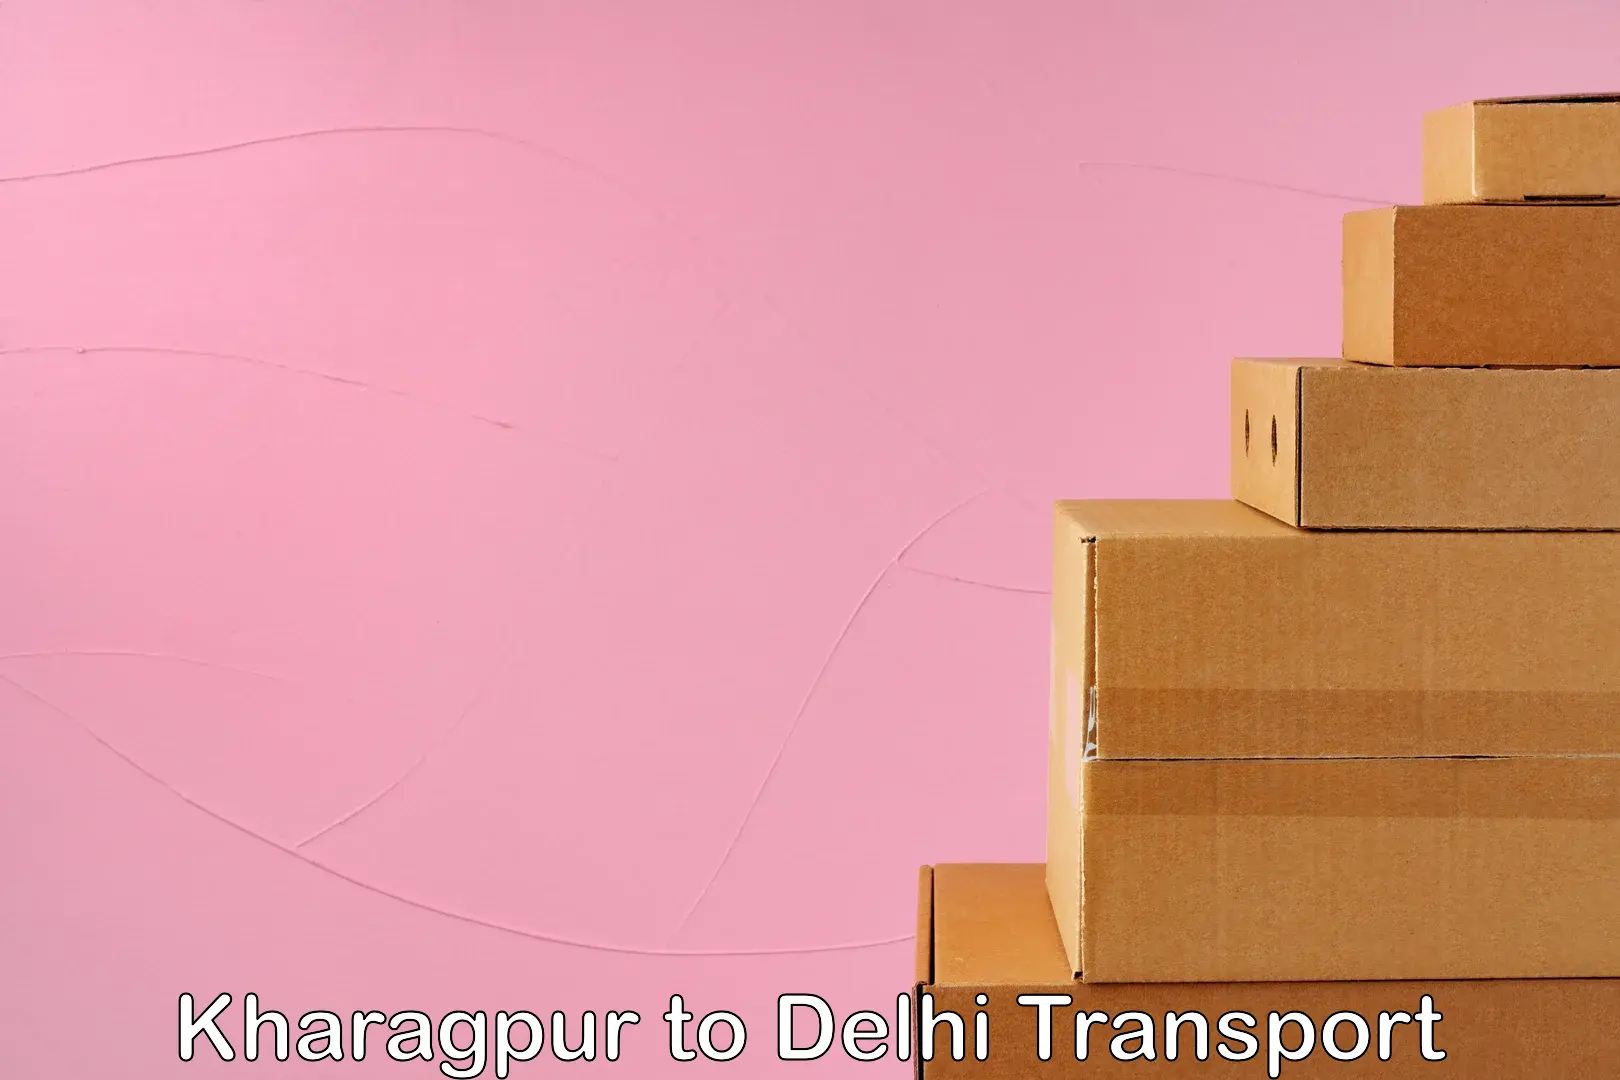 Delivery service Kharagpur to IIT Delhi